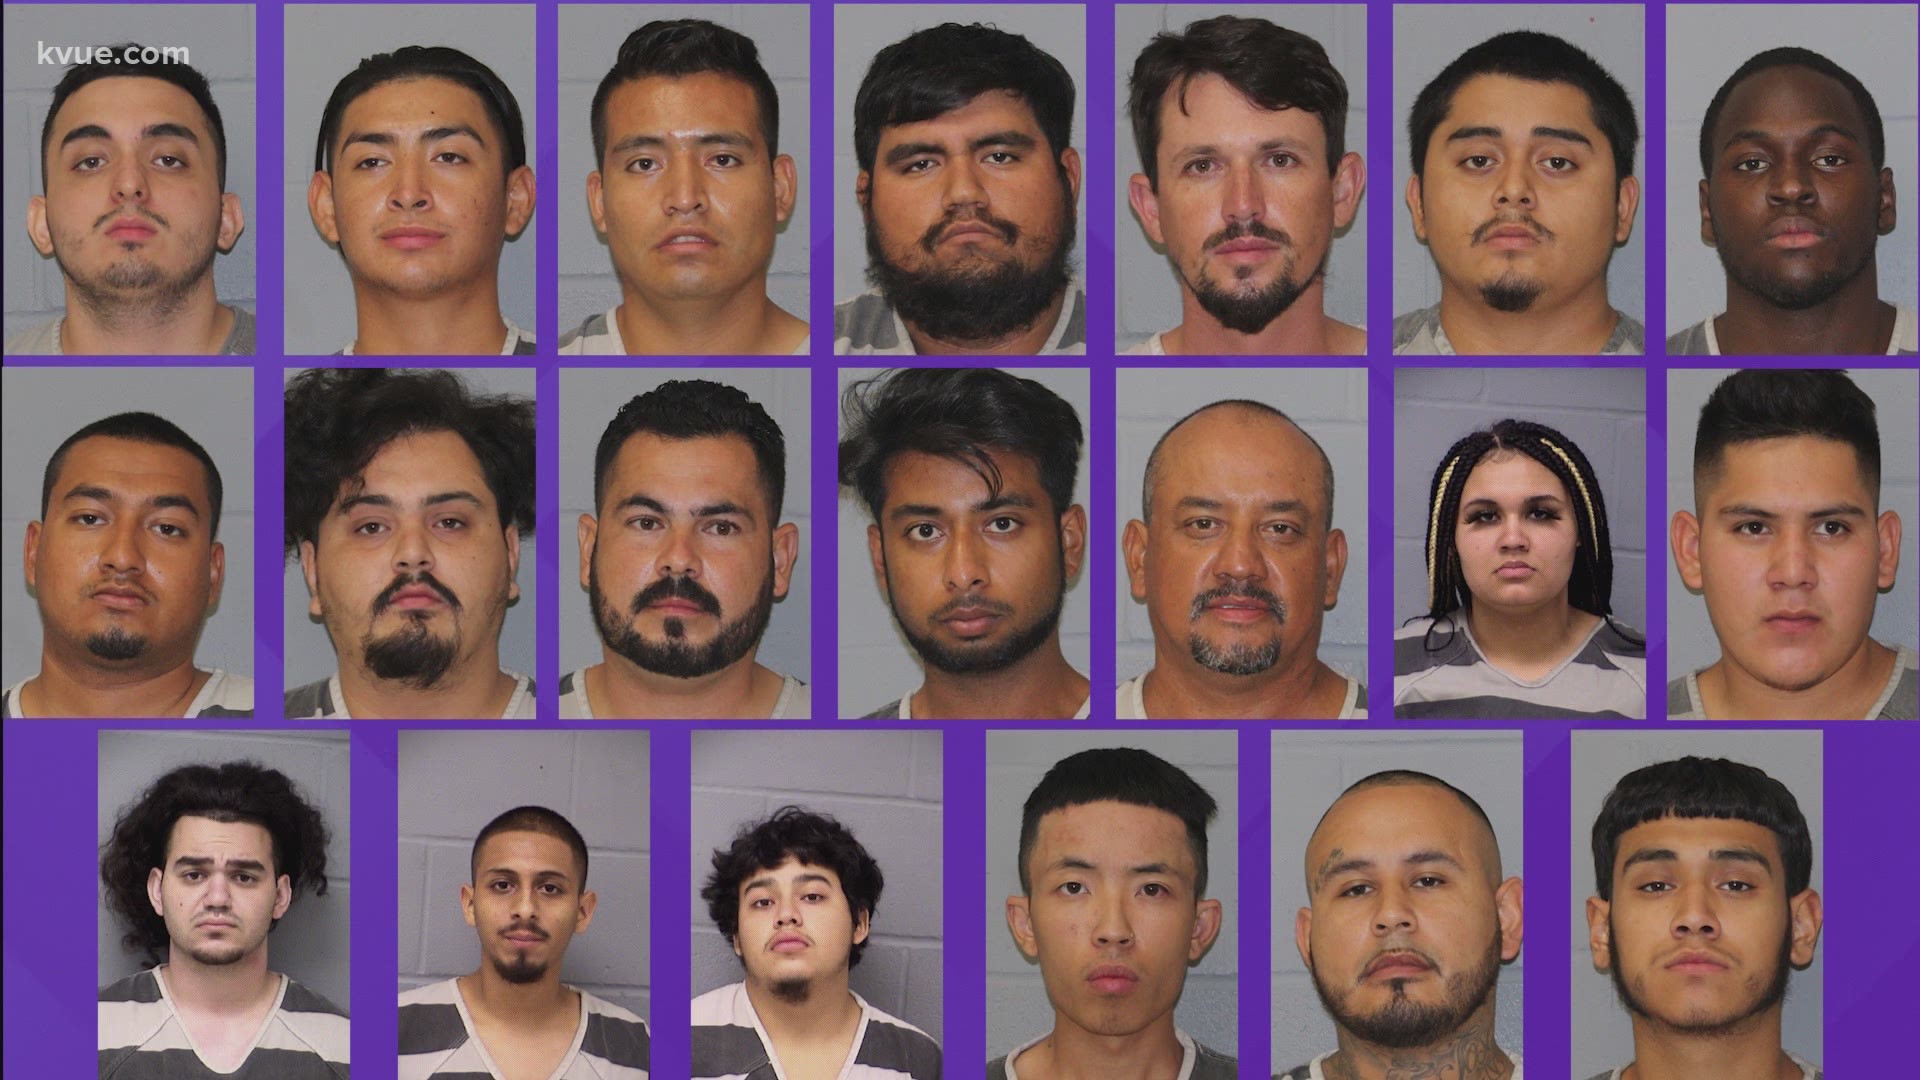 Austin police say 22 people are now facing charges and 25 cars were towed after a car club operation over the weekend.